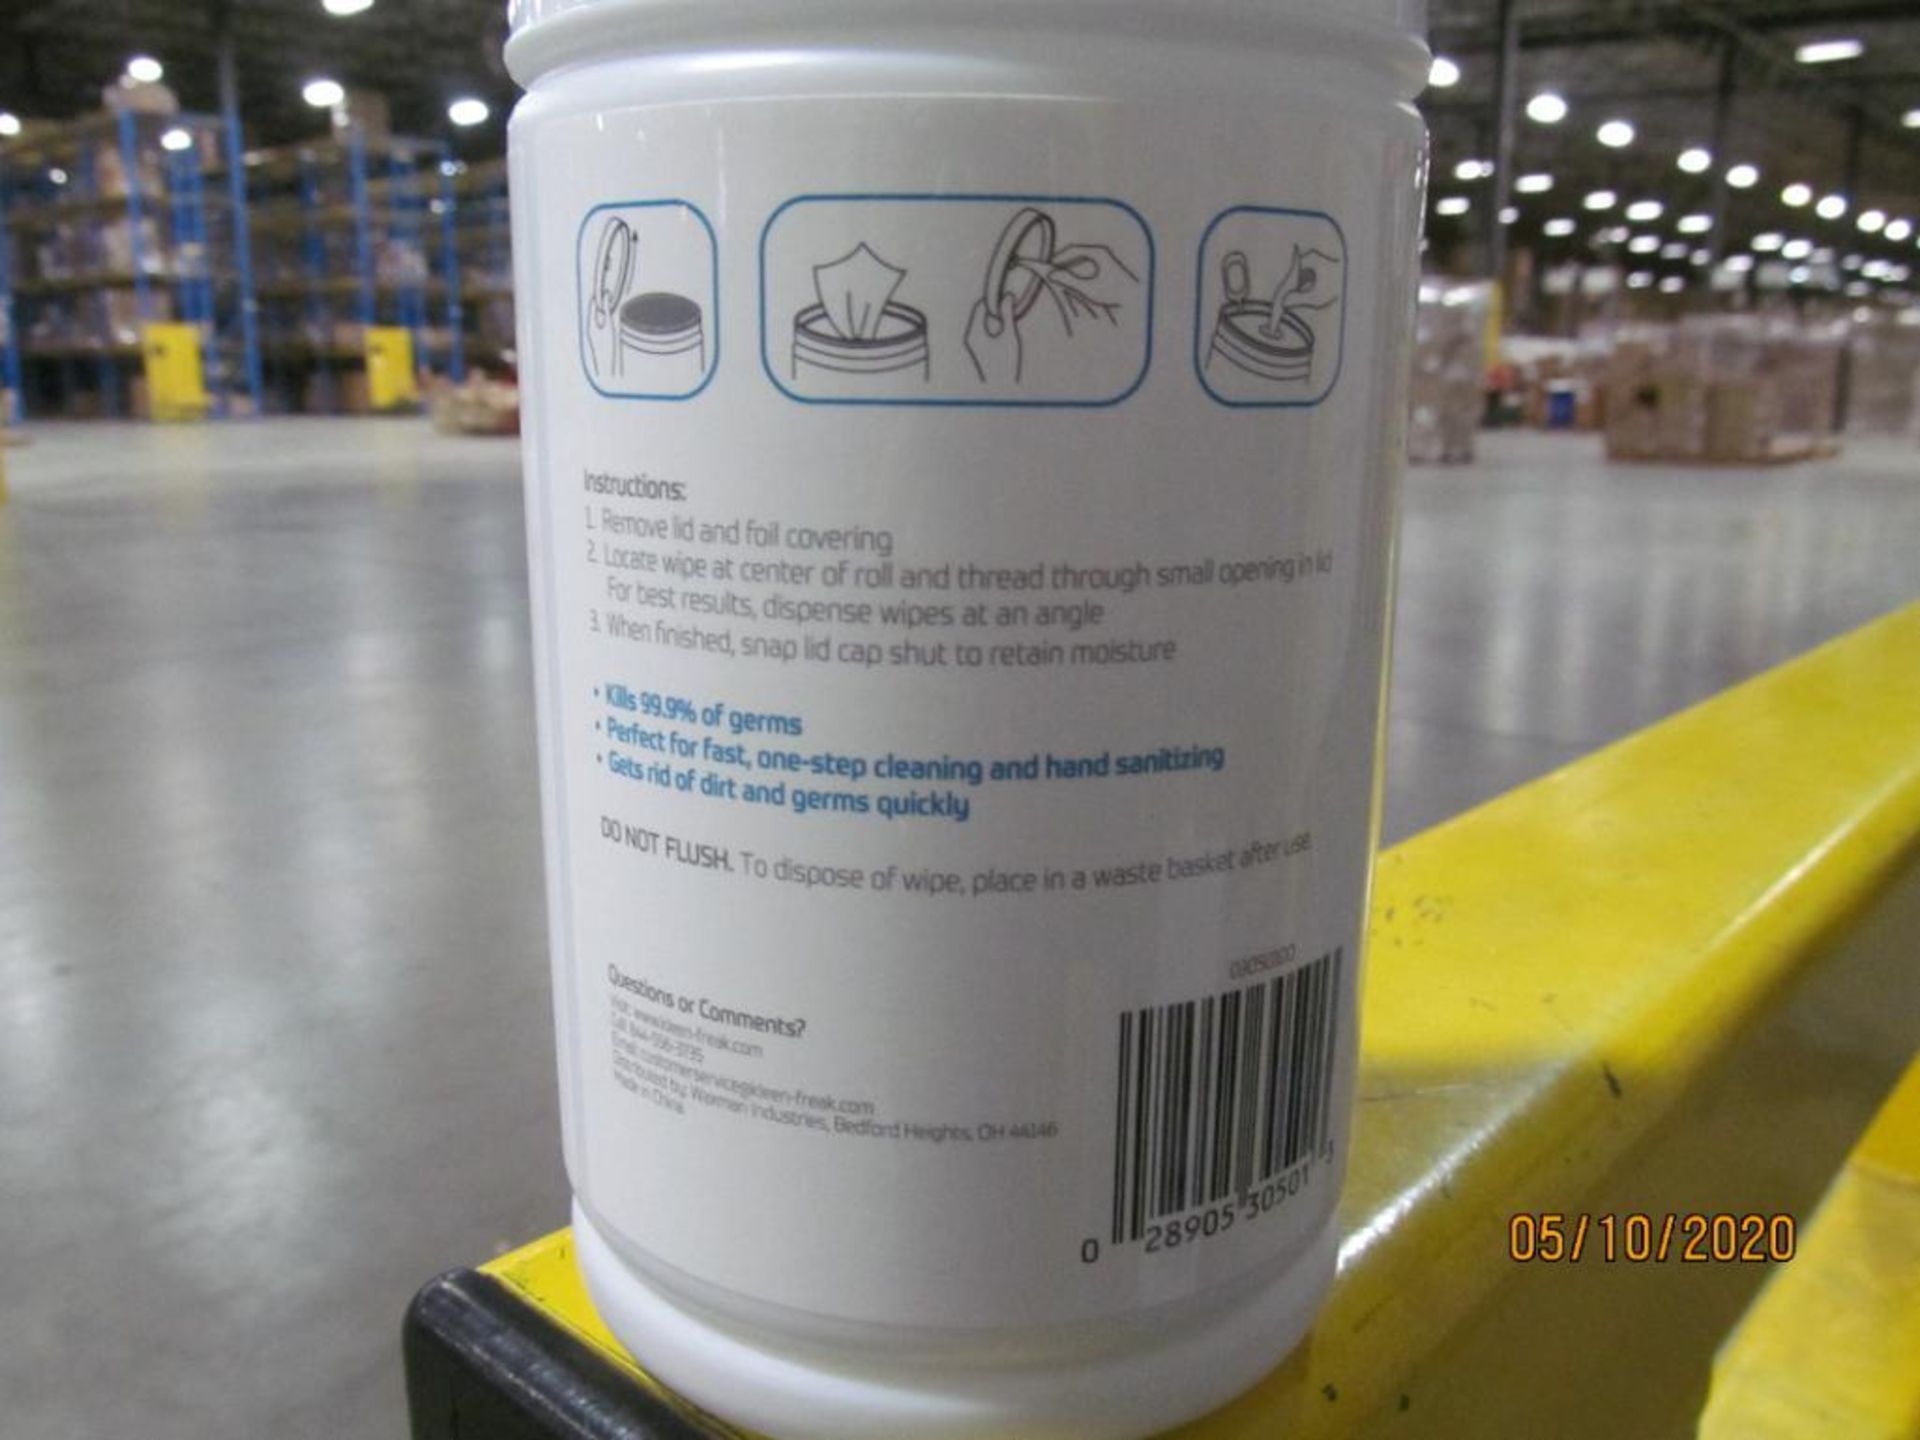 Lot of Waxman Kleen Freak Sanitizing Wipes consisting of 202,176 packages on 312 pallets. Each packa - Image 2 of 11